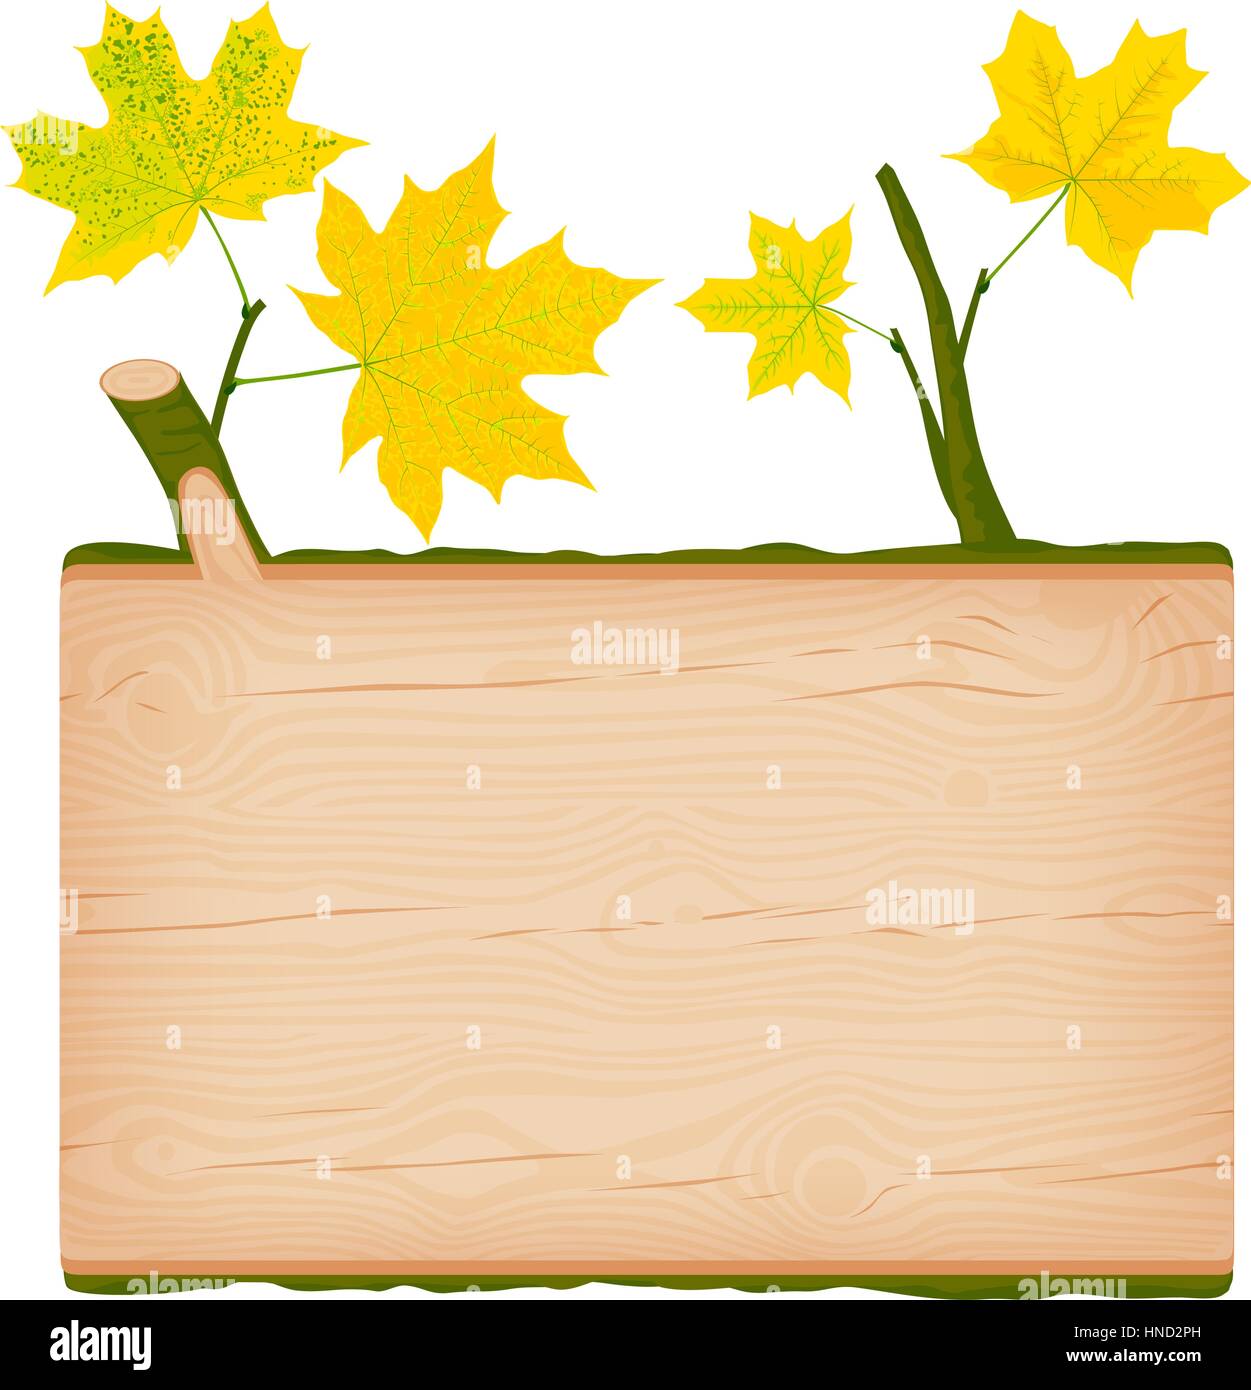 Natural textured maple wooden rectangular signboard with yellow autumn leaves vector illustration Stock Vector